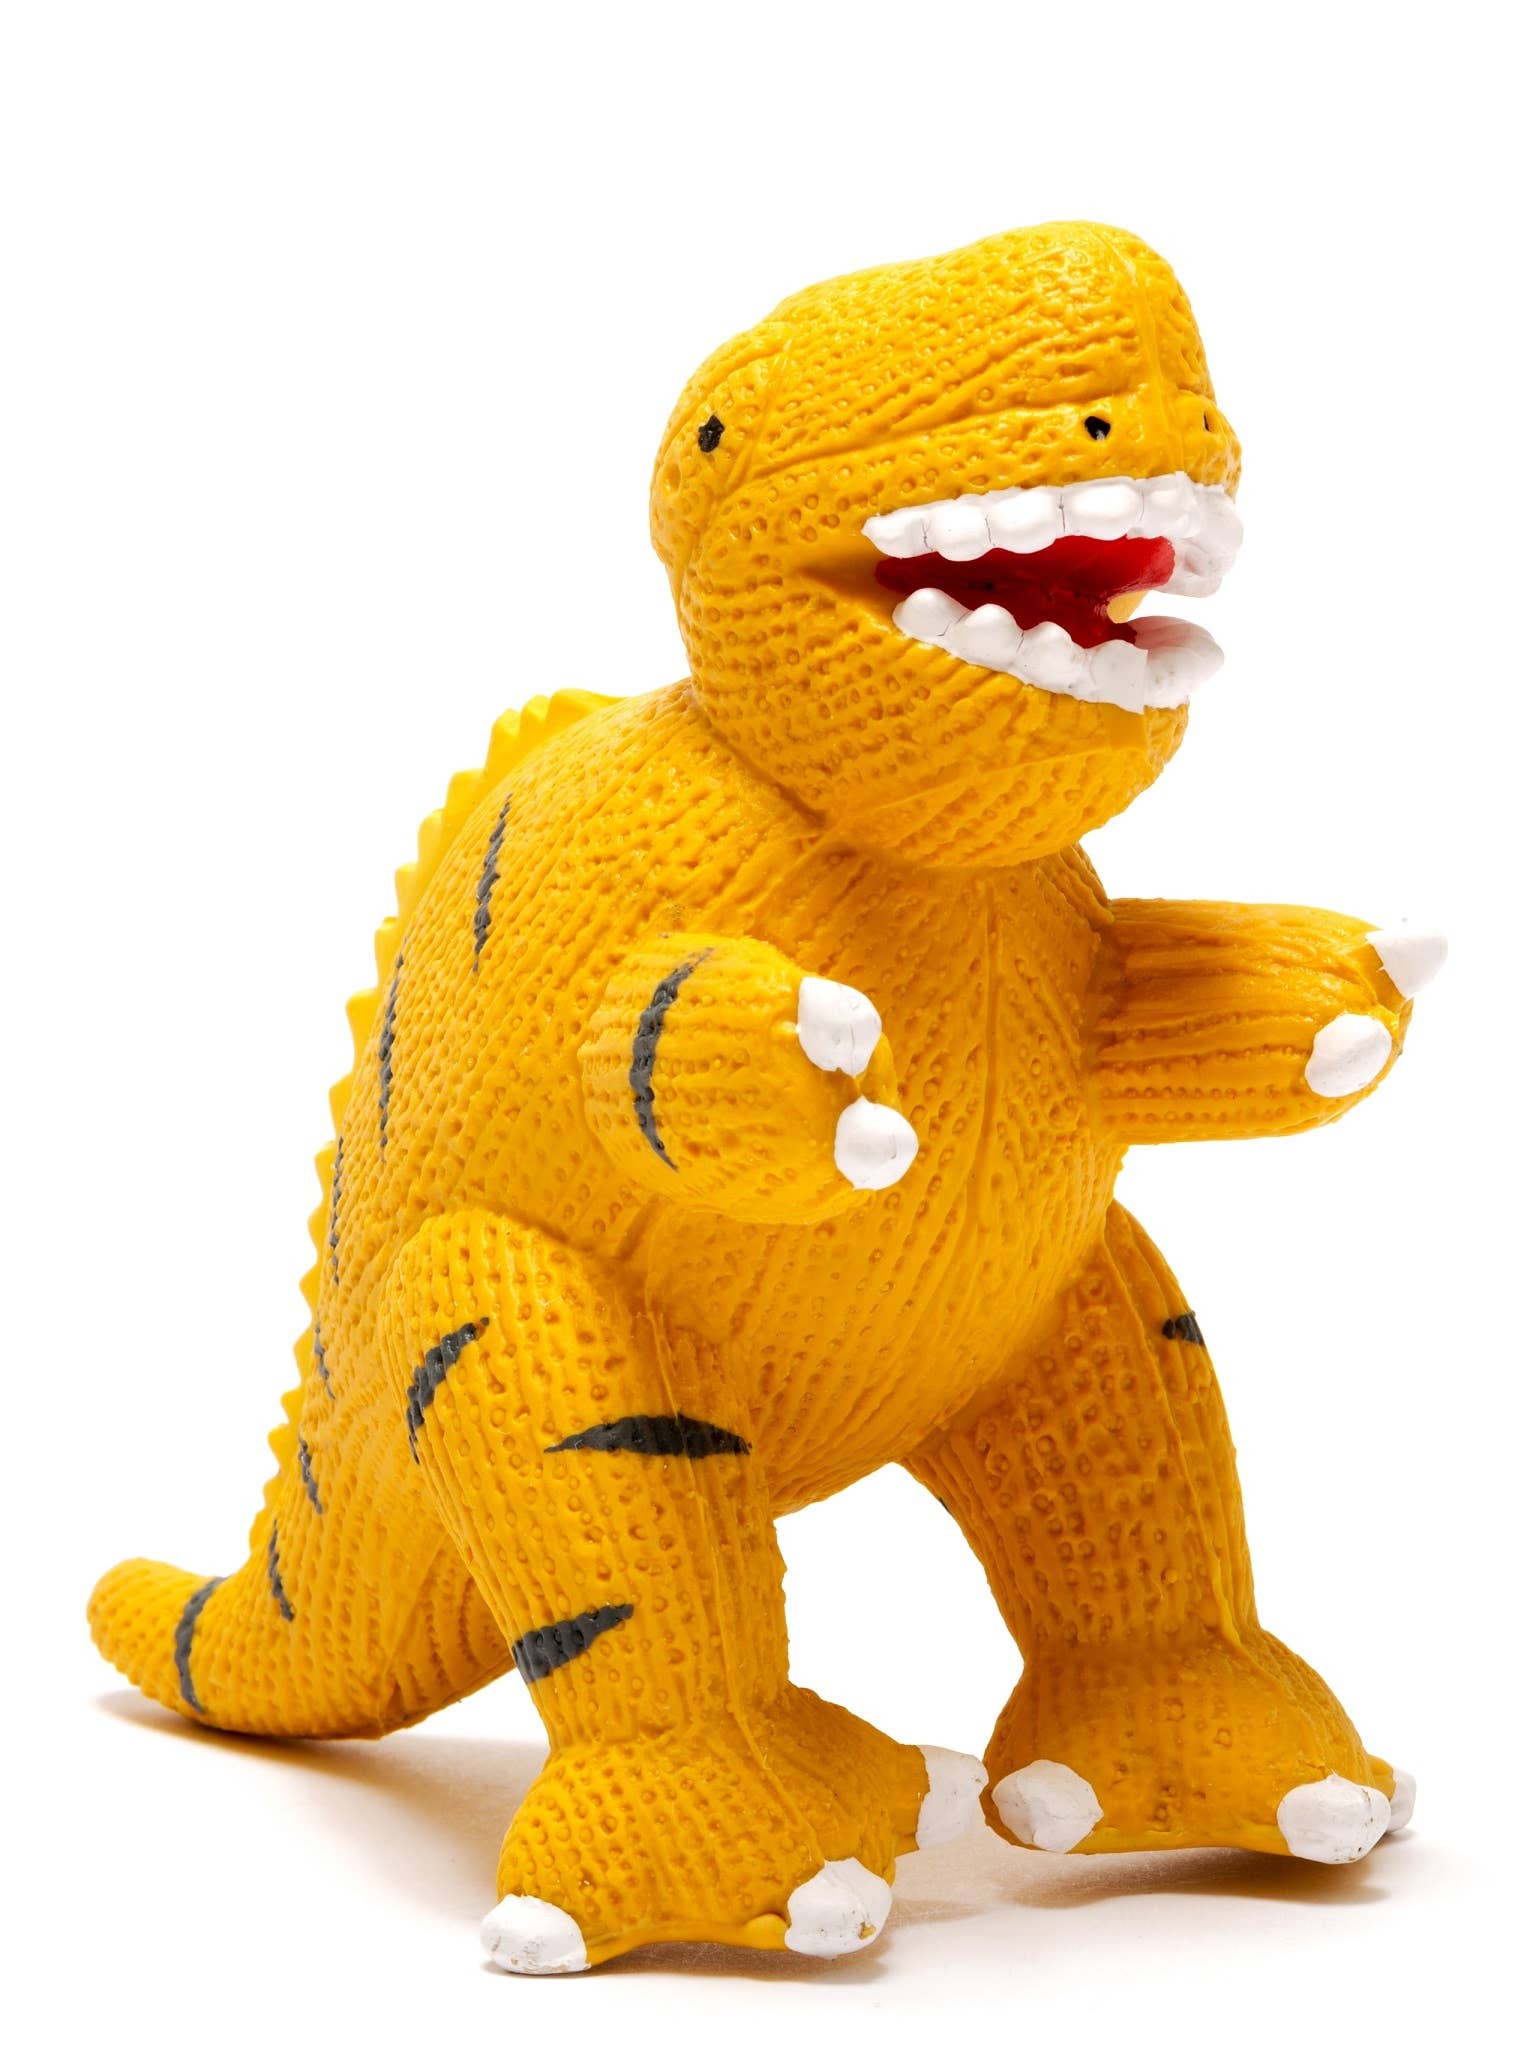 Best Years Ltd - Natural Rubber T Rex Dinosaur Toy, Bath Toy & Teether Yellow